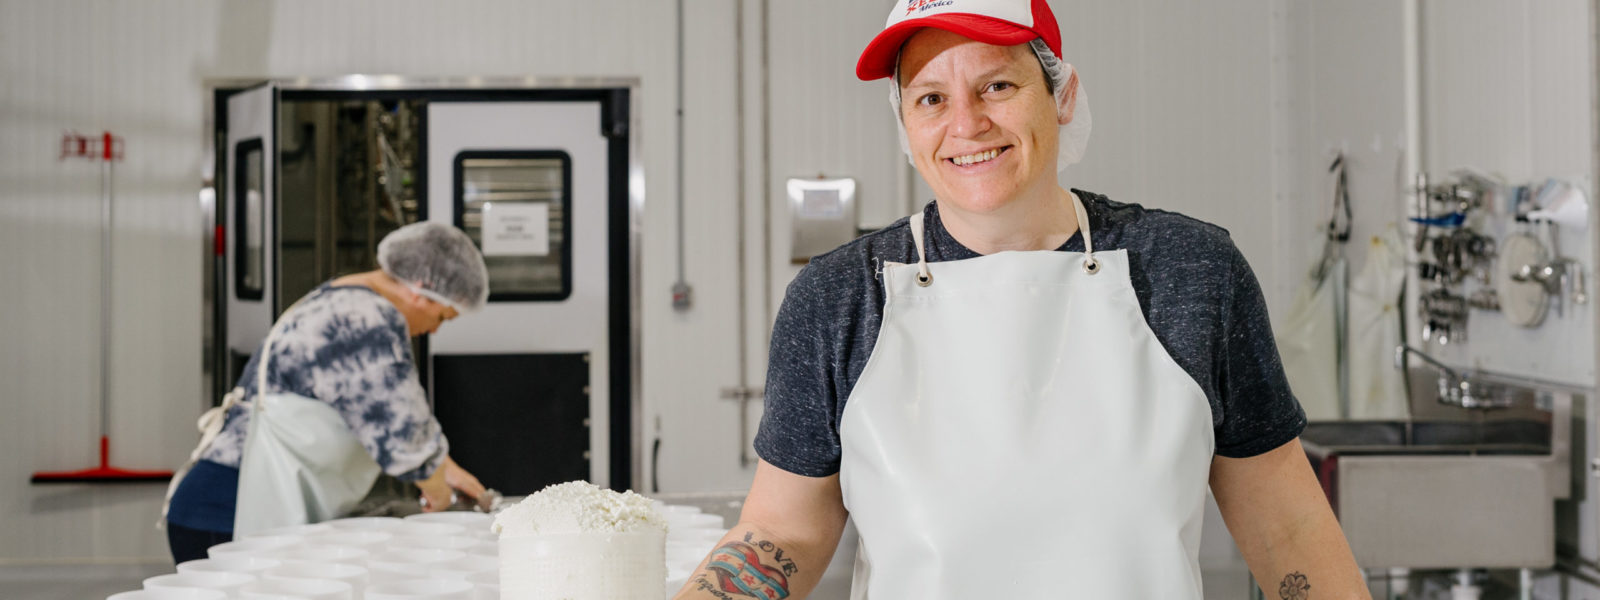 A person wearing a white apron and holding goat cheese in a creamery